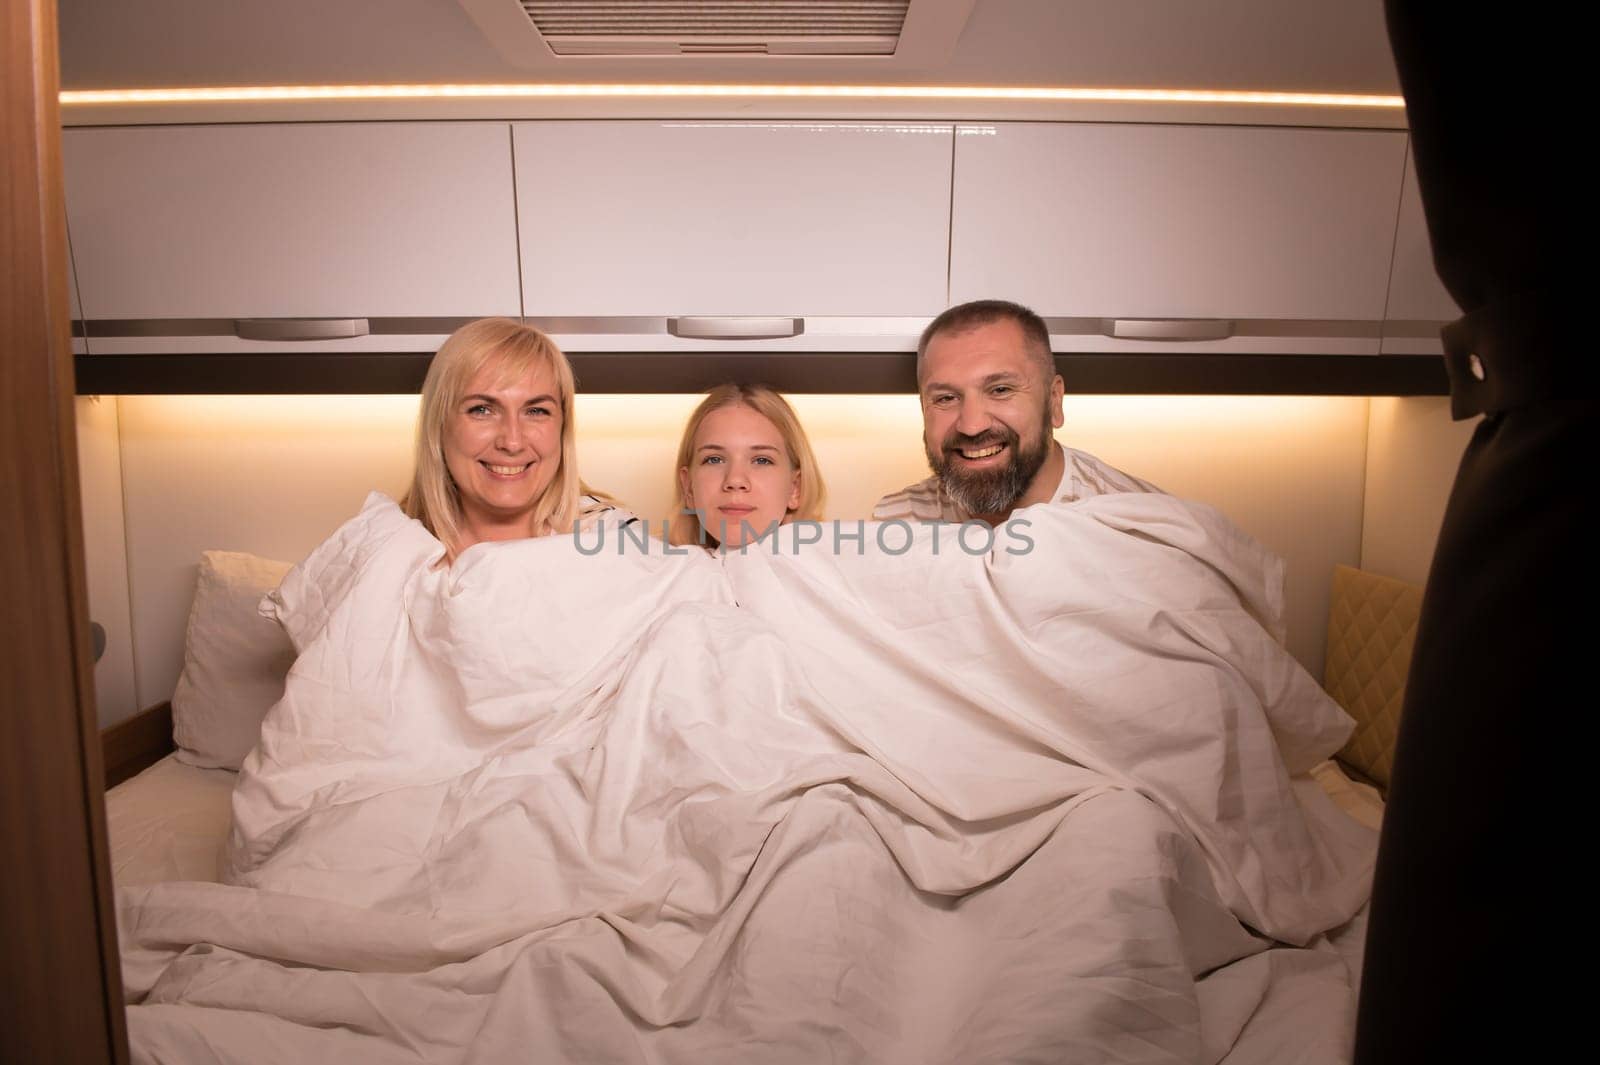 The family is getting ready for bed sitting on the bed in their motorhome.